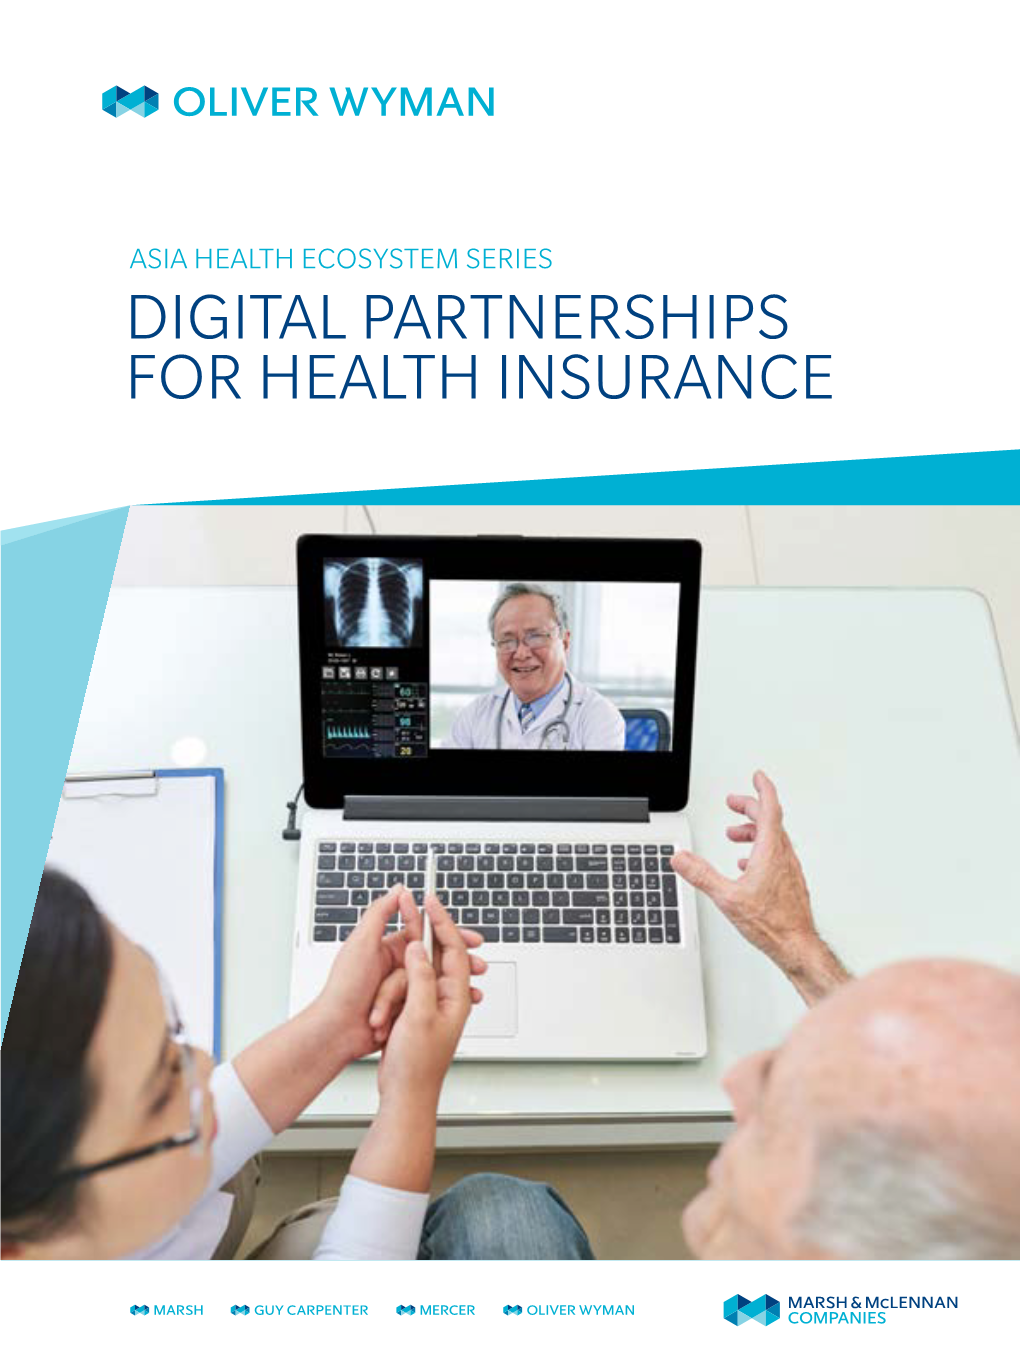 Digital Partnerships for Health Insurance What Is Happening Globally – and How Should Asia Prepare?